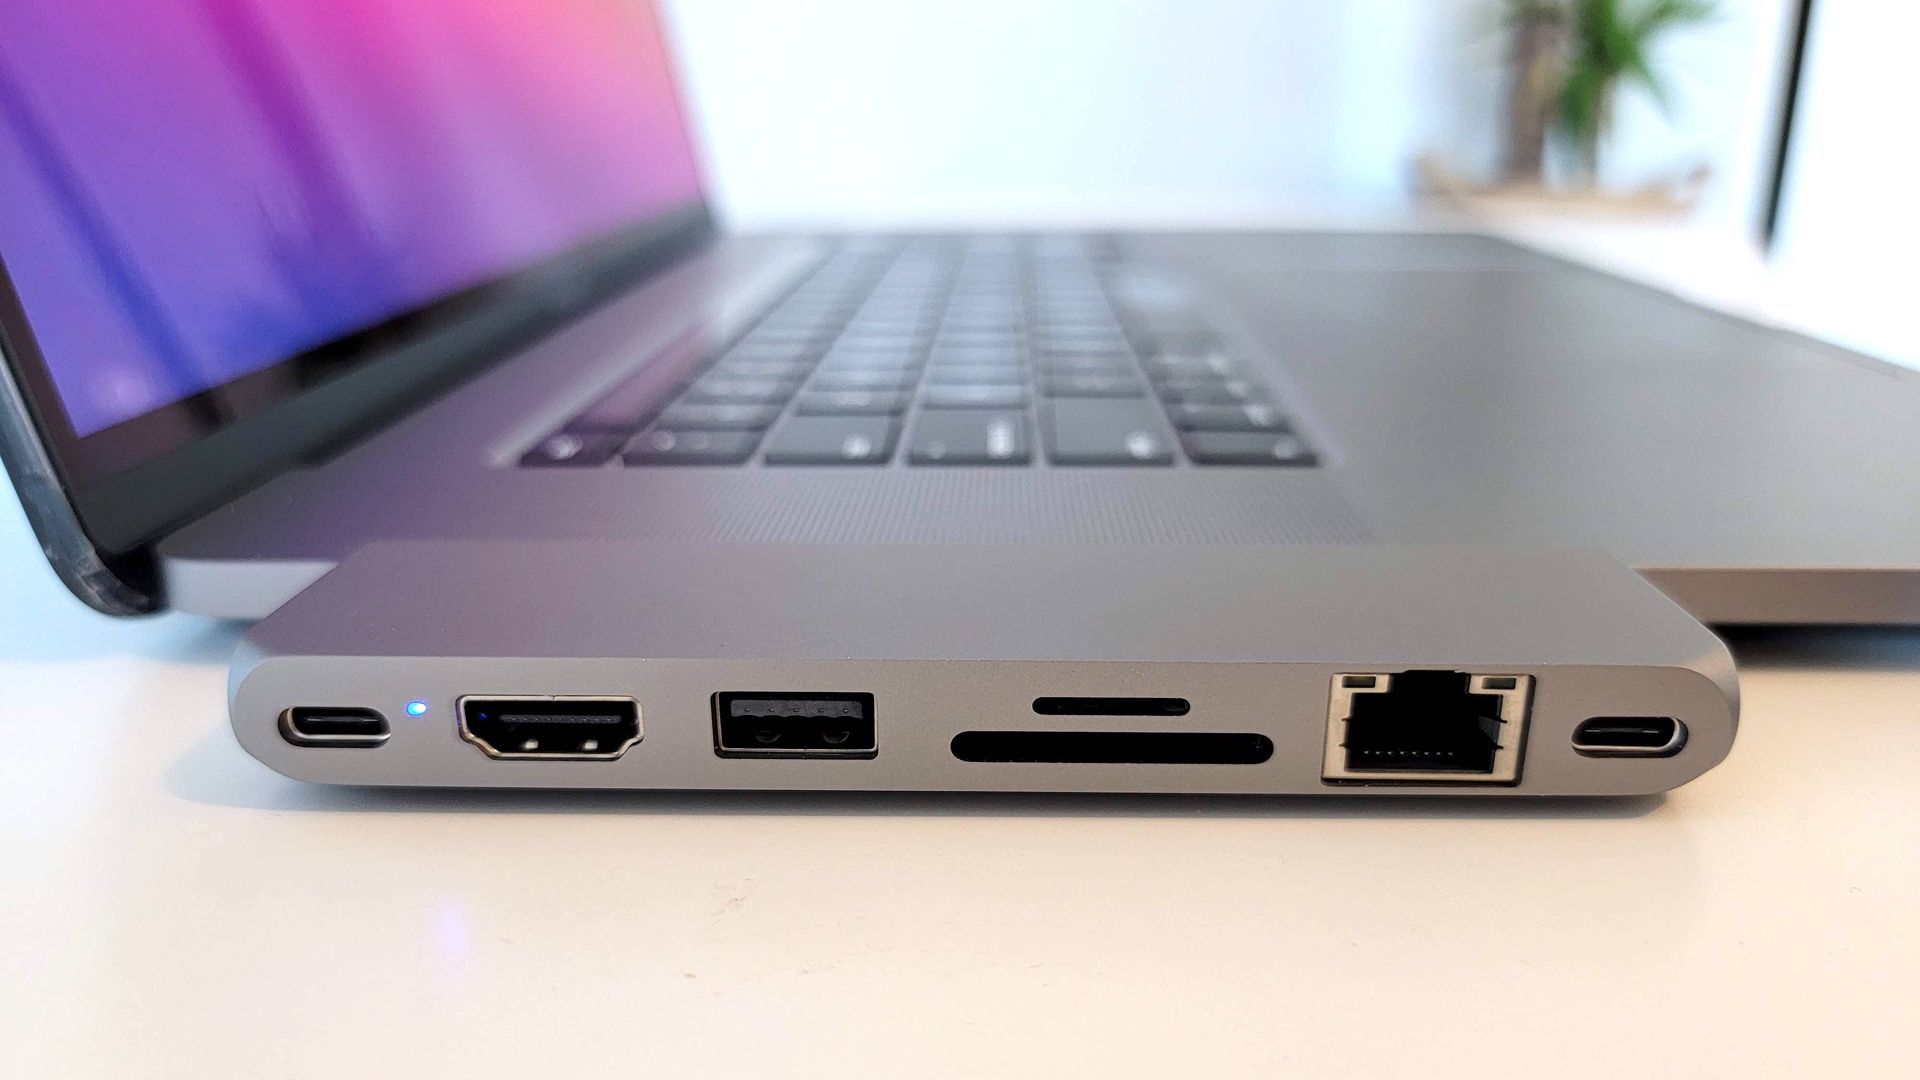 Satechi Pro Hub Max Review: This Dongle Does it All